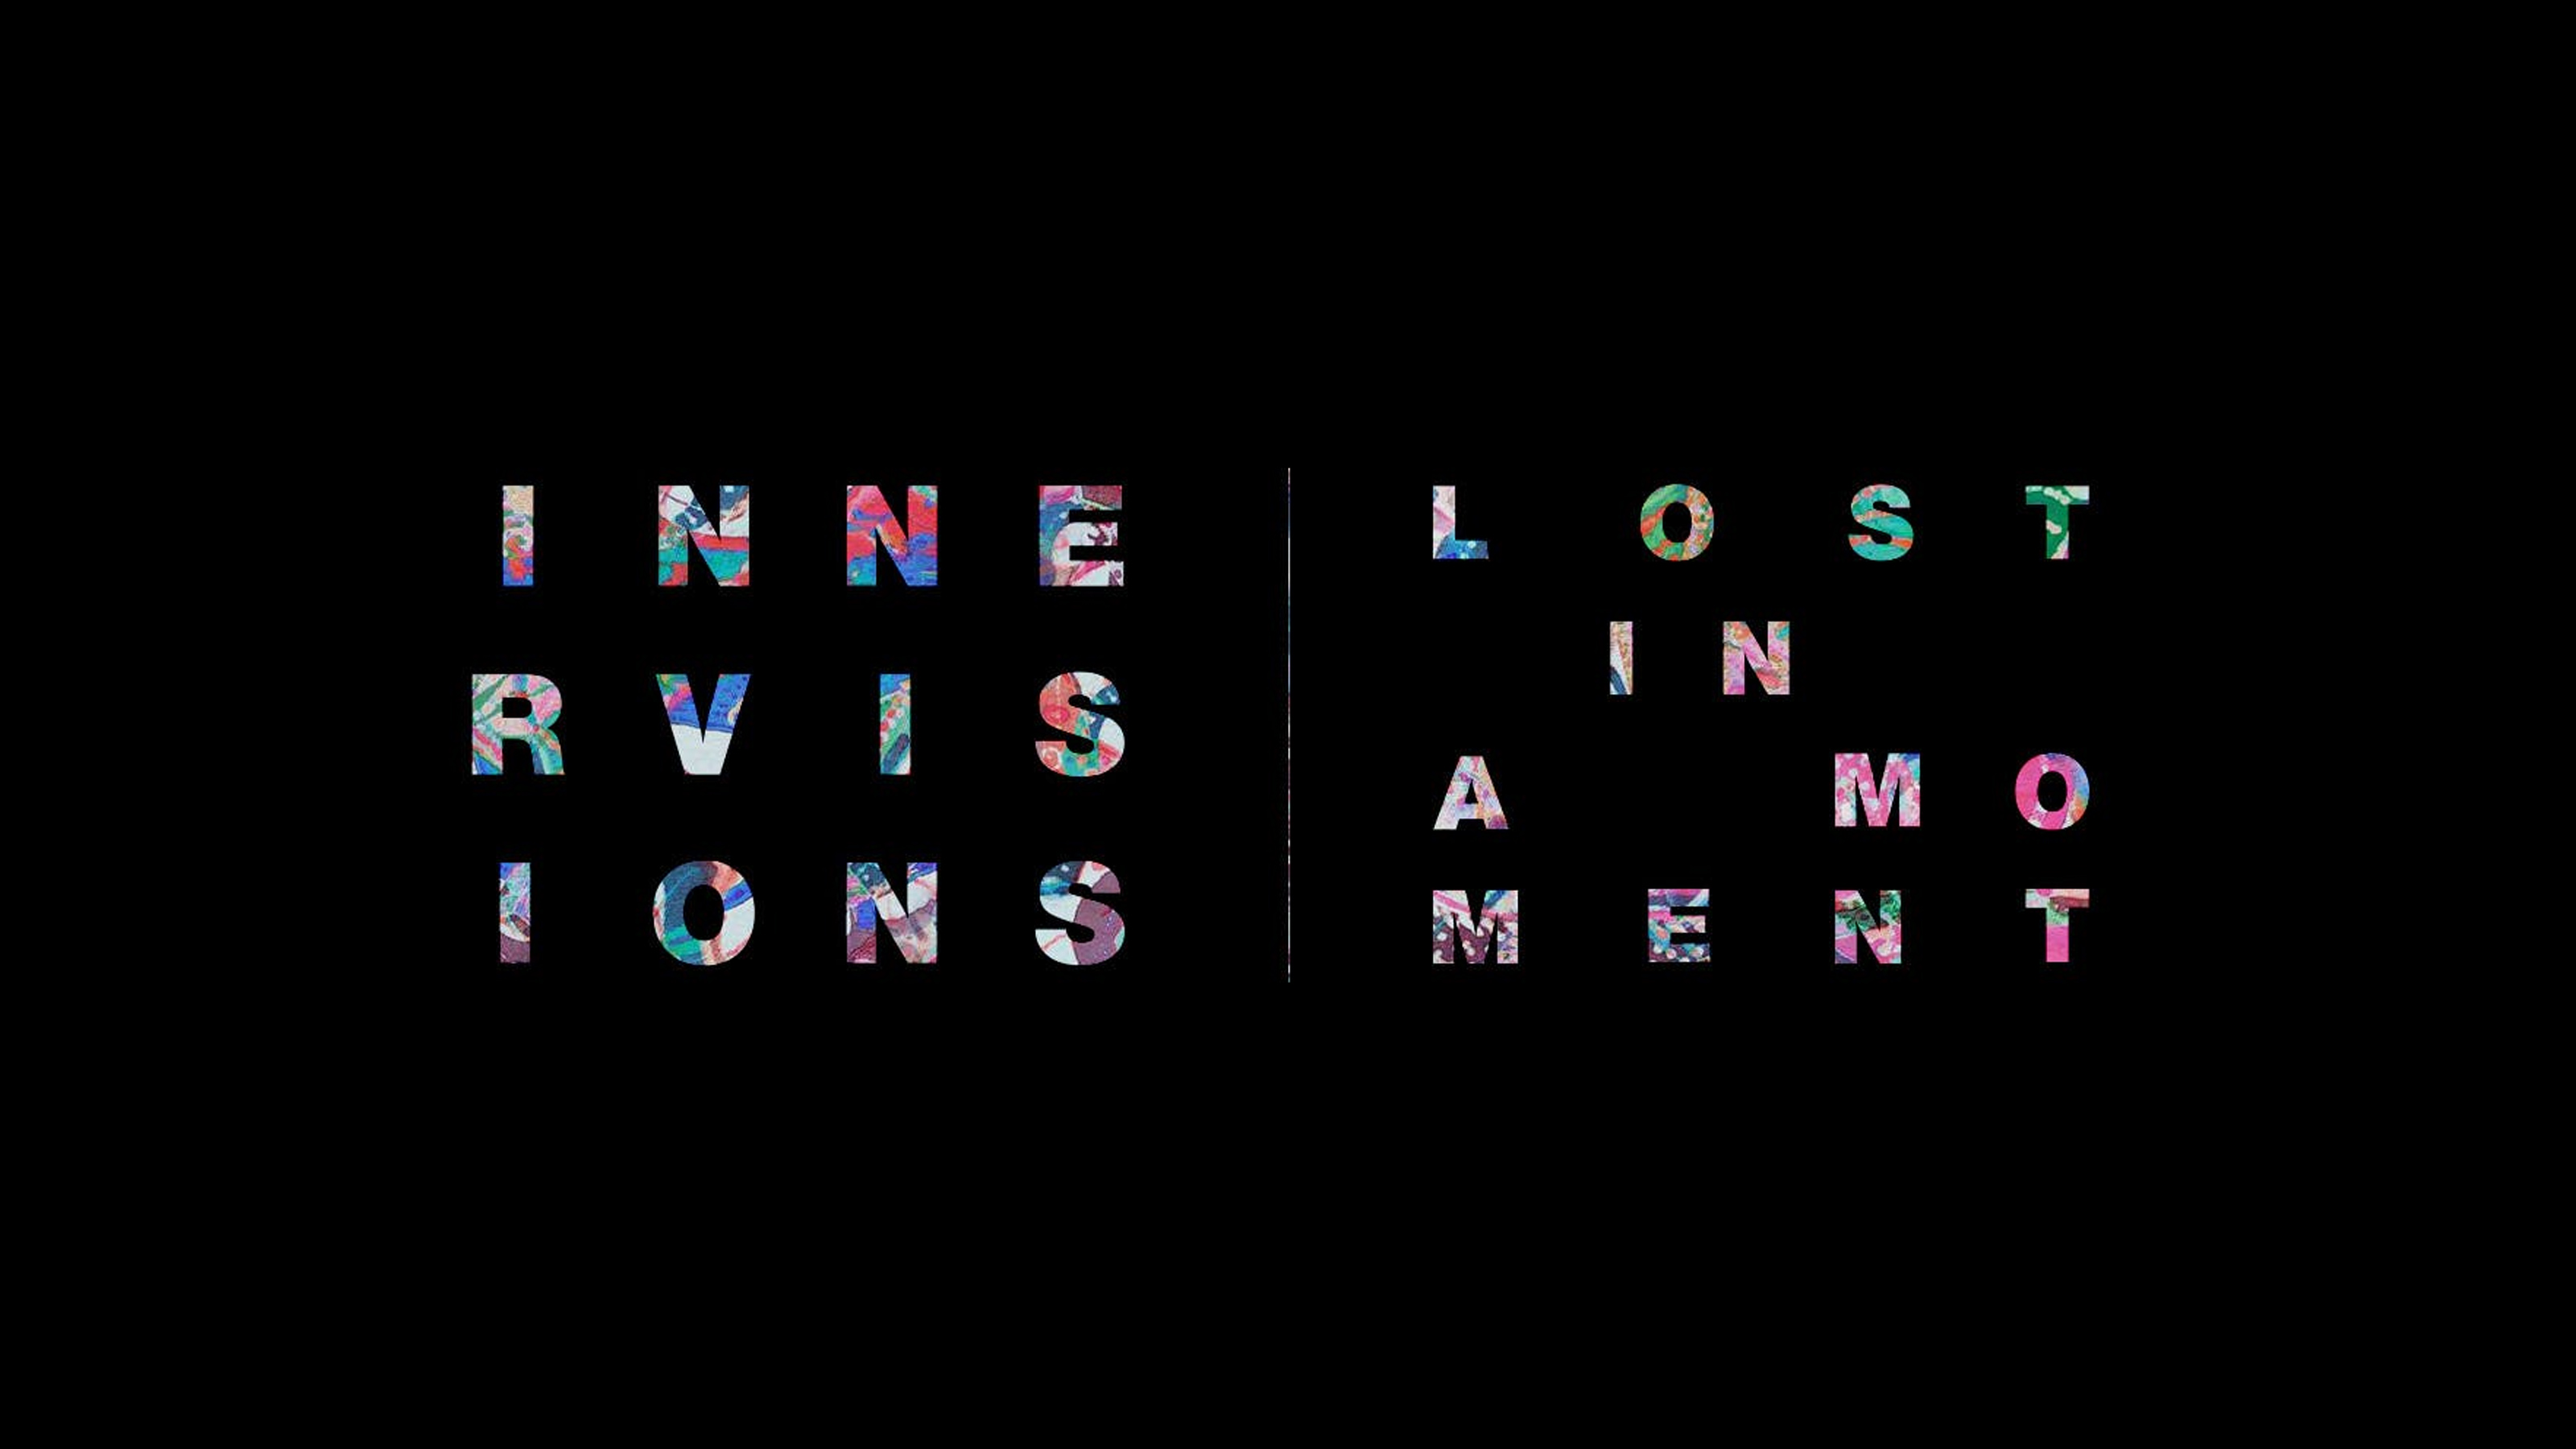 Innervisions: Lost in a moment